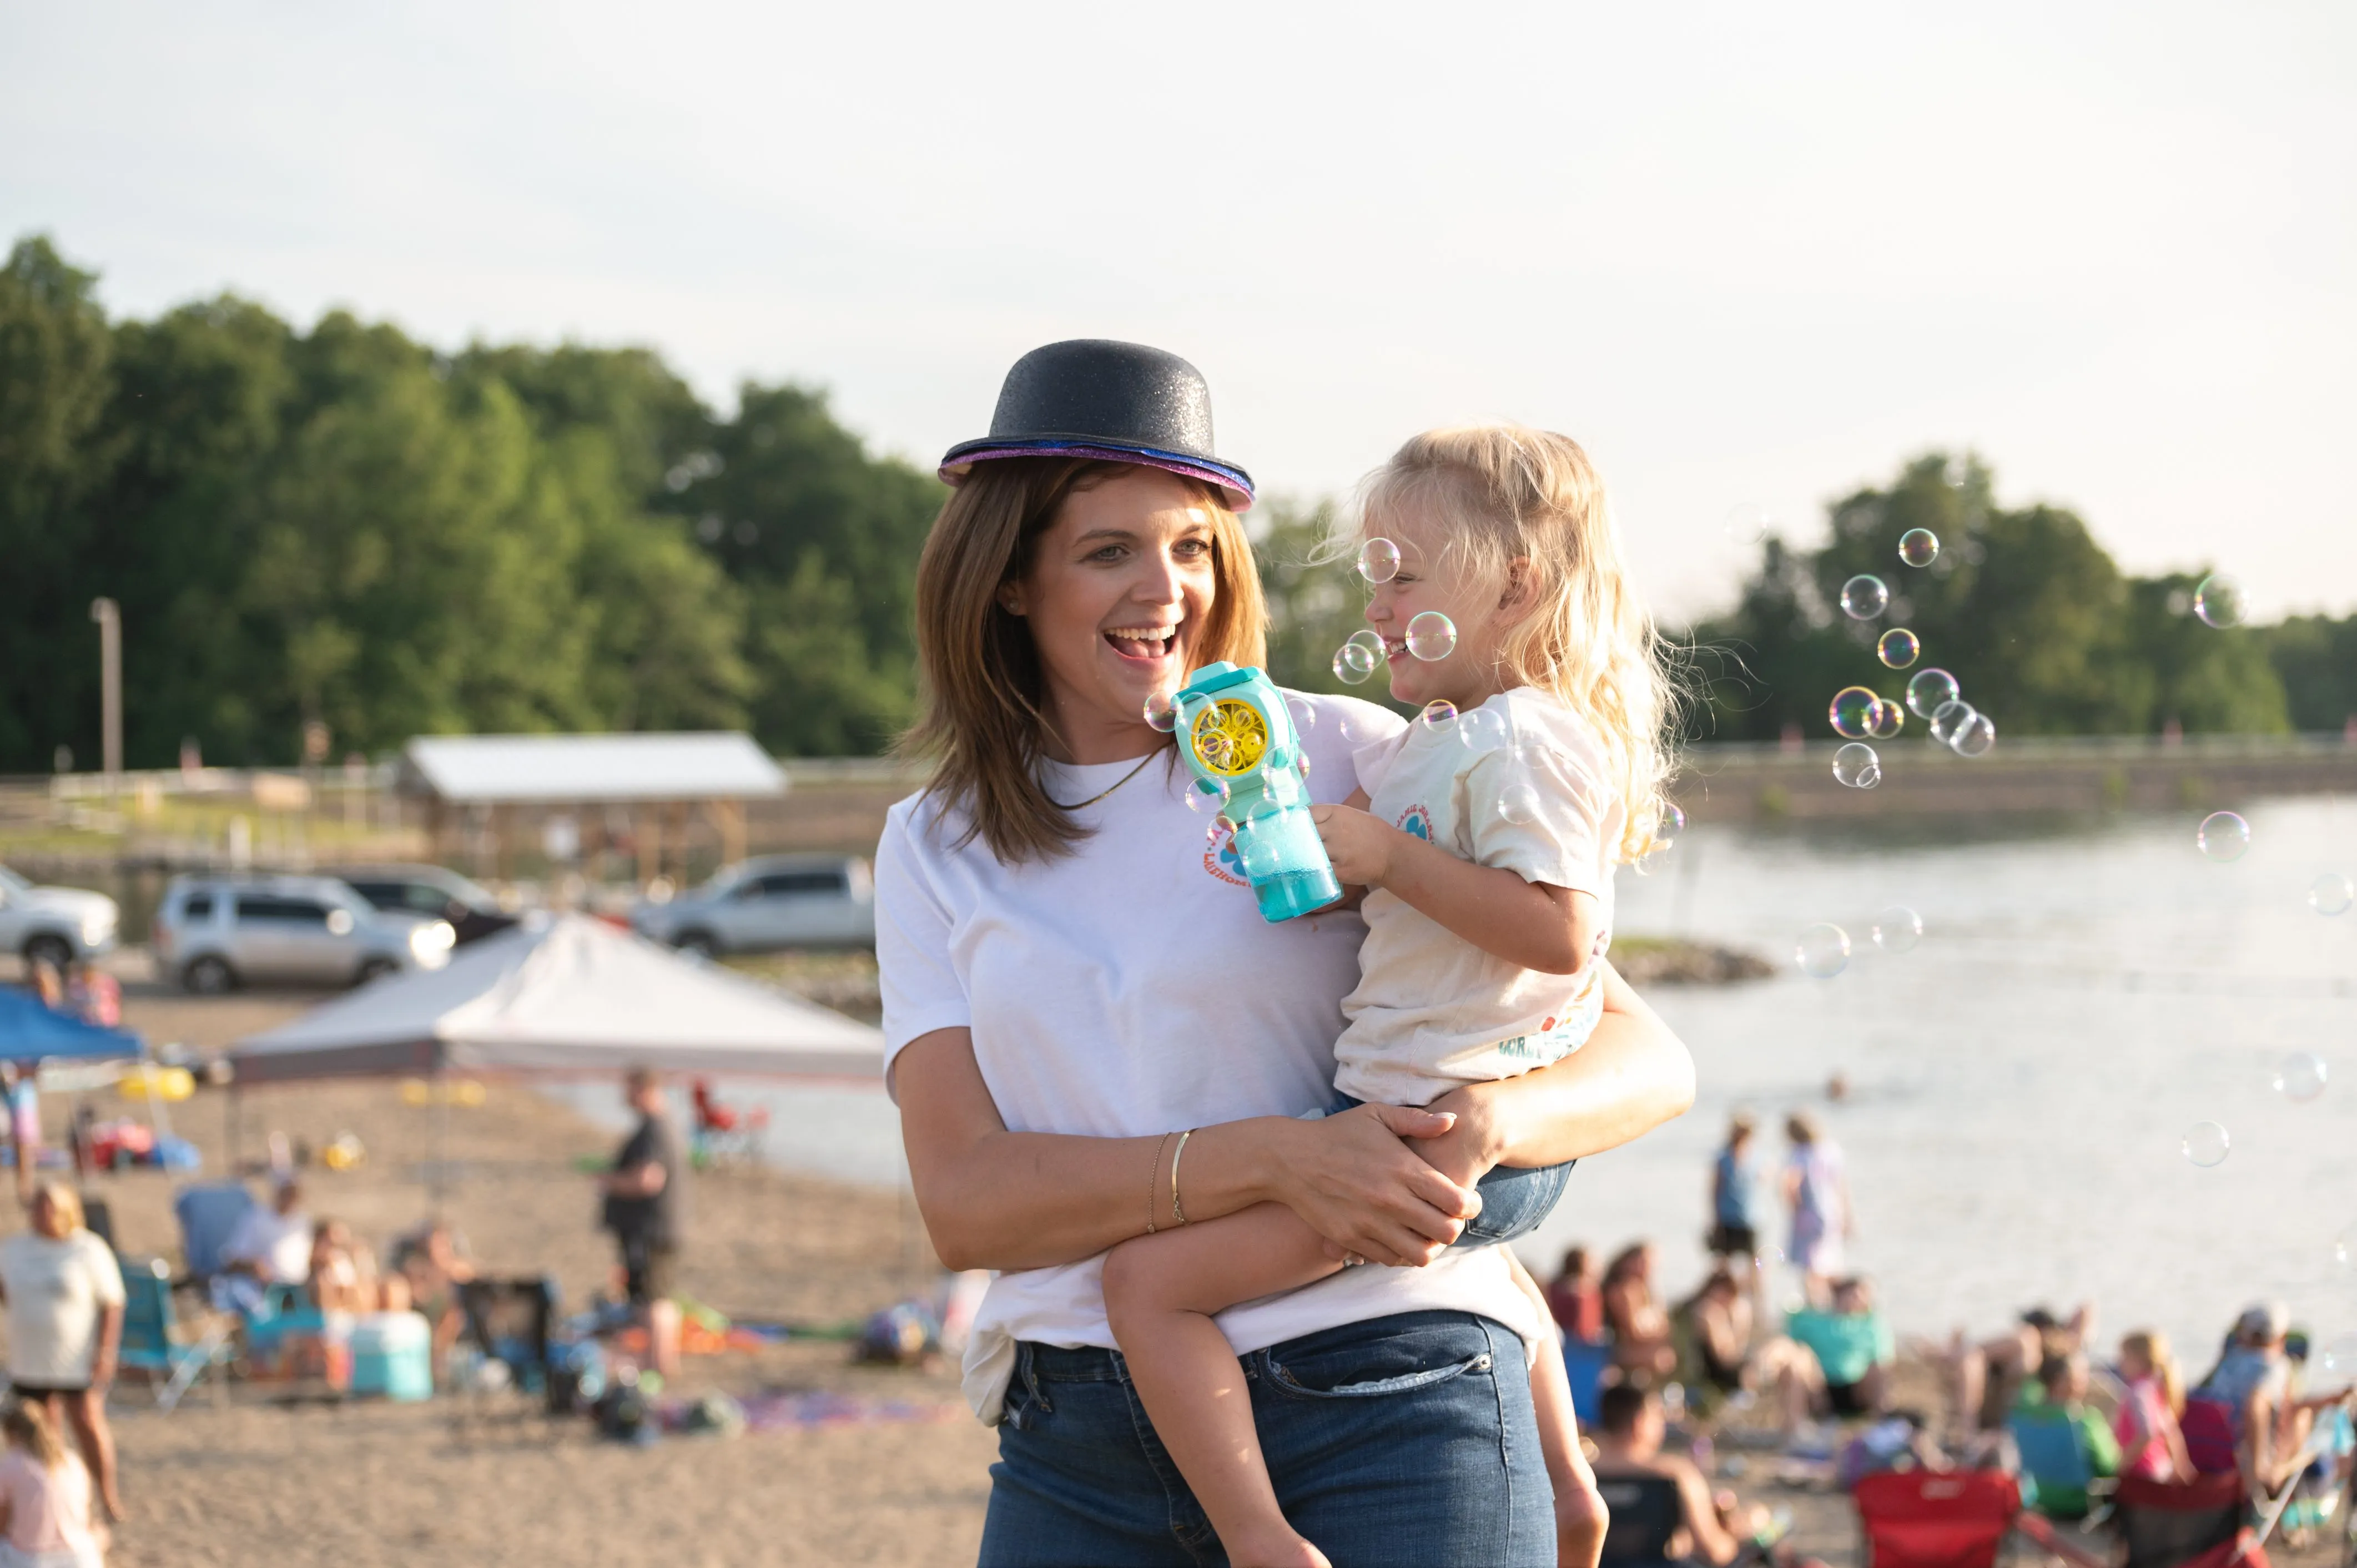 Woman in a hat holding a child blowing bubbles at a crowded beach.